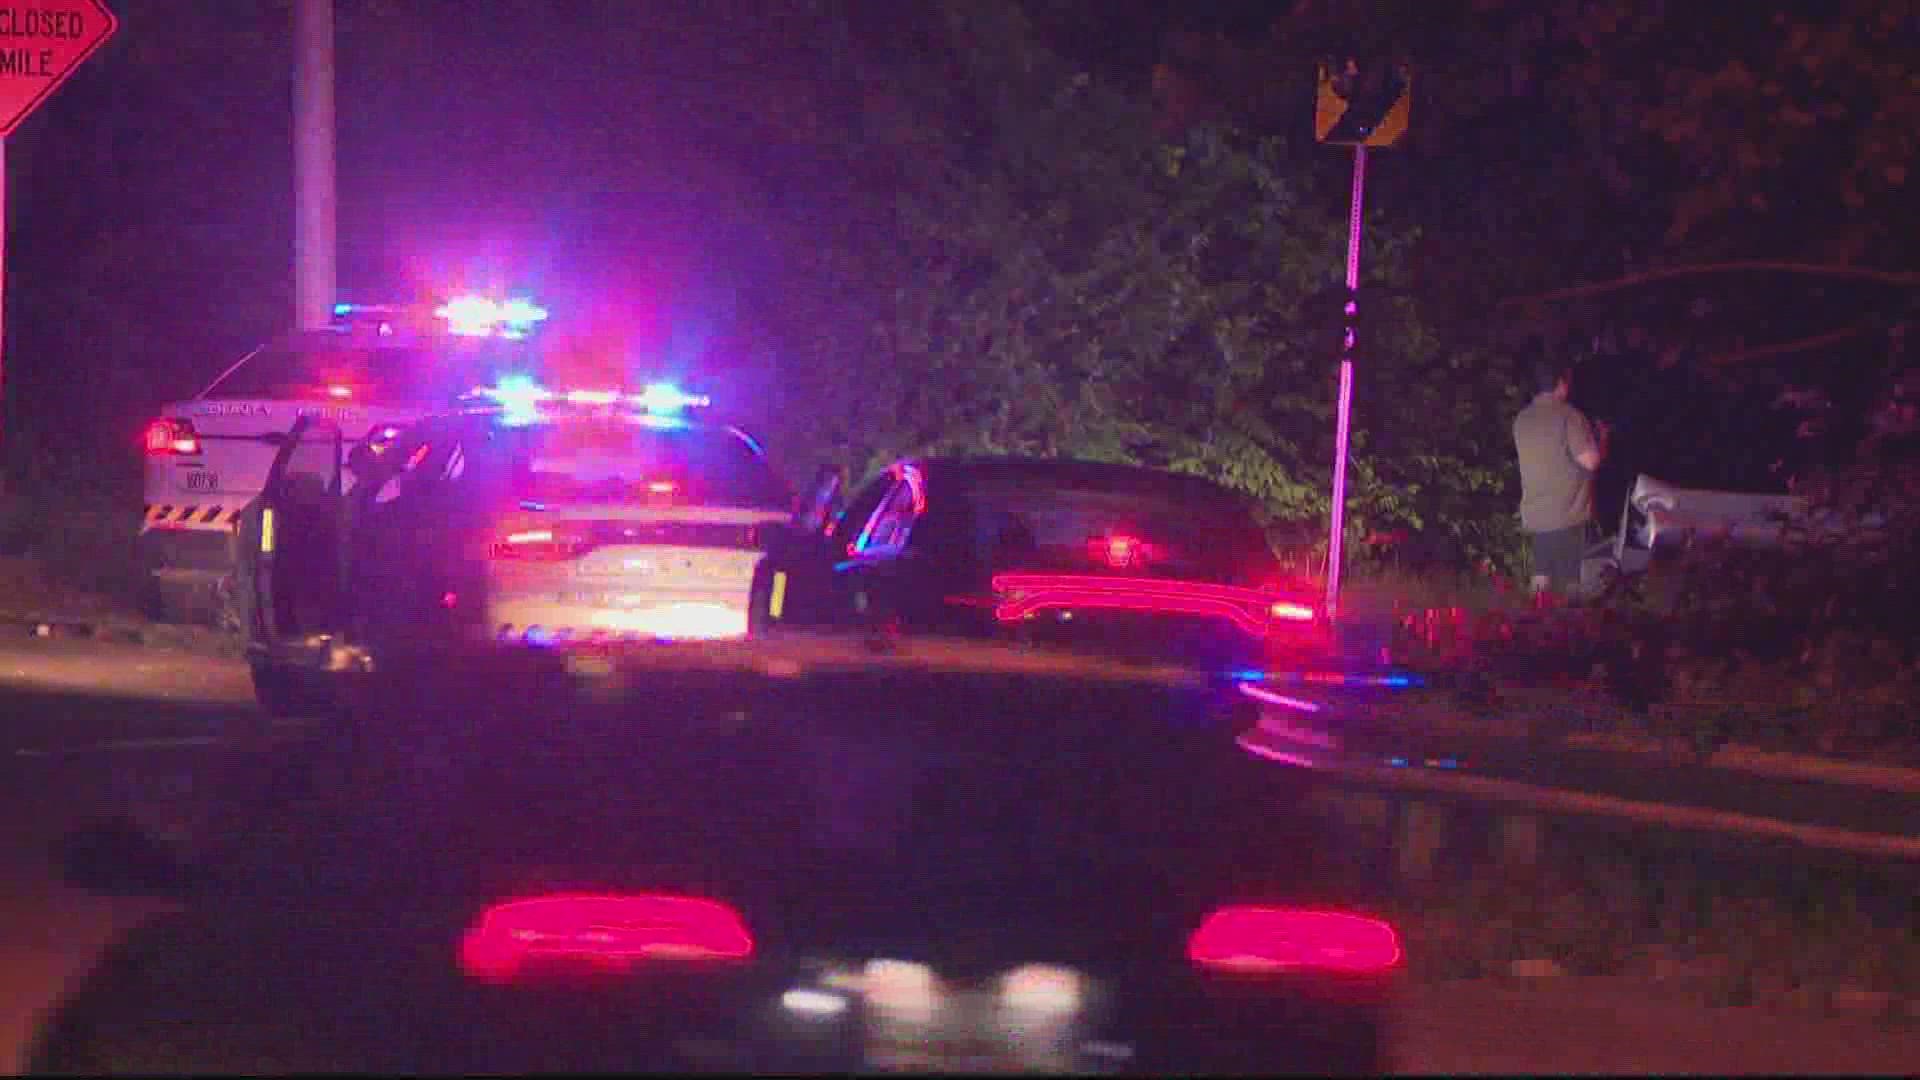 The BMW used in the police chase was reportedly stolen from a man's driveway in Arlington.